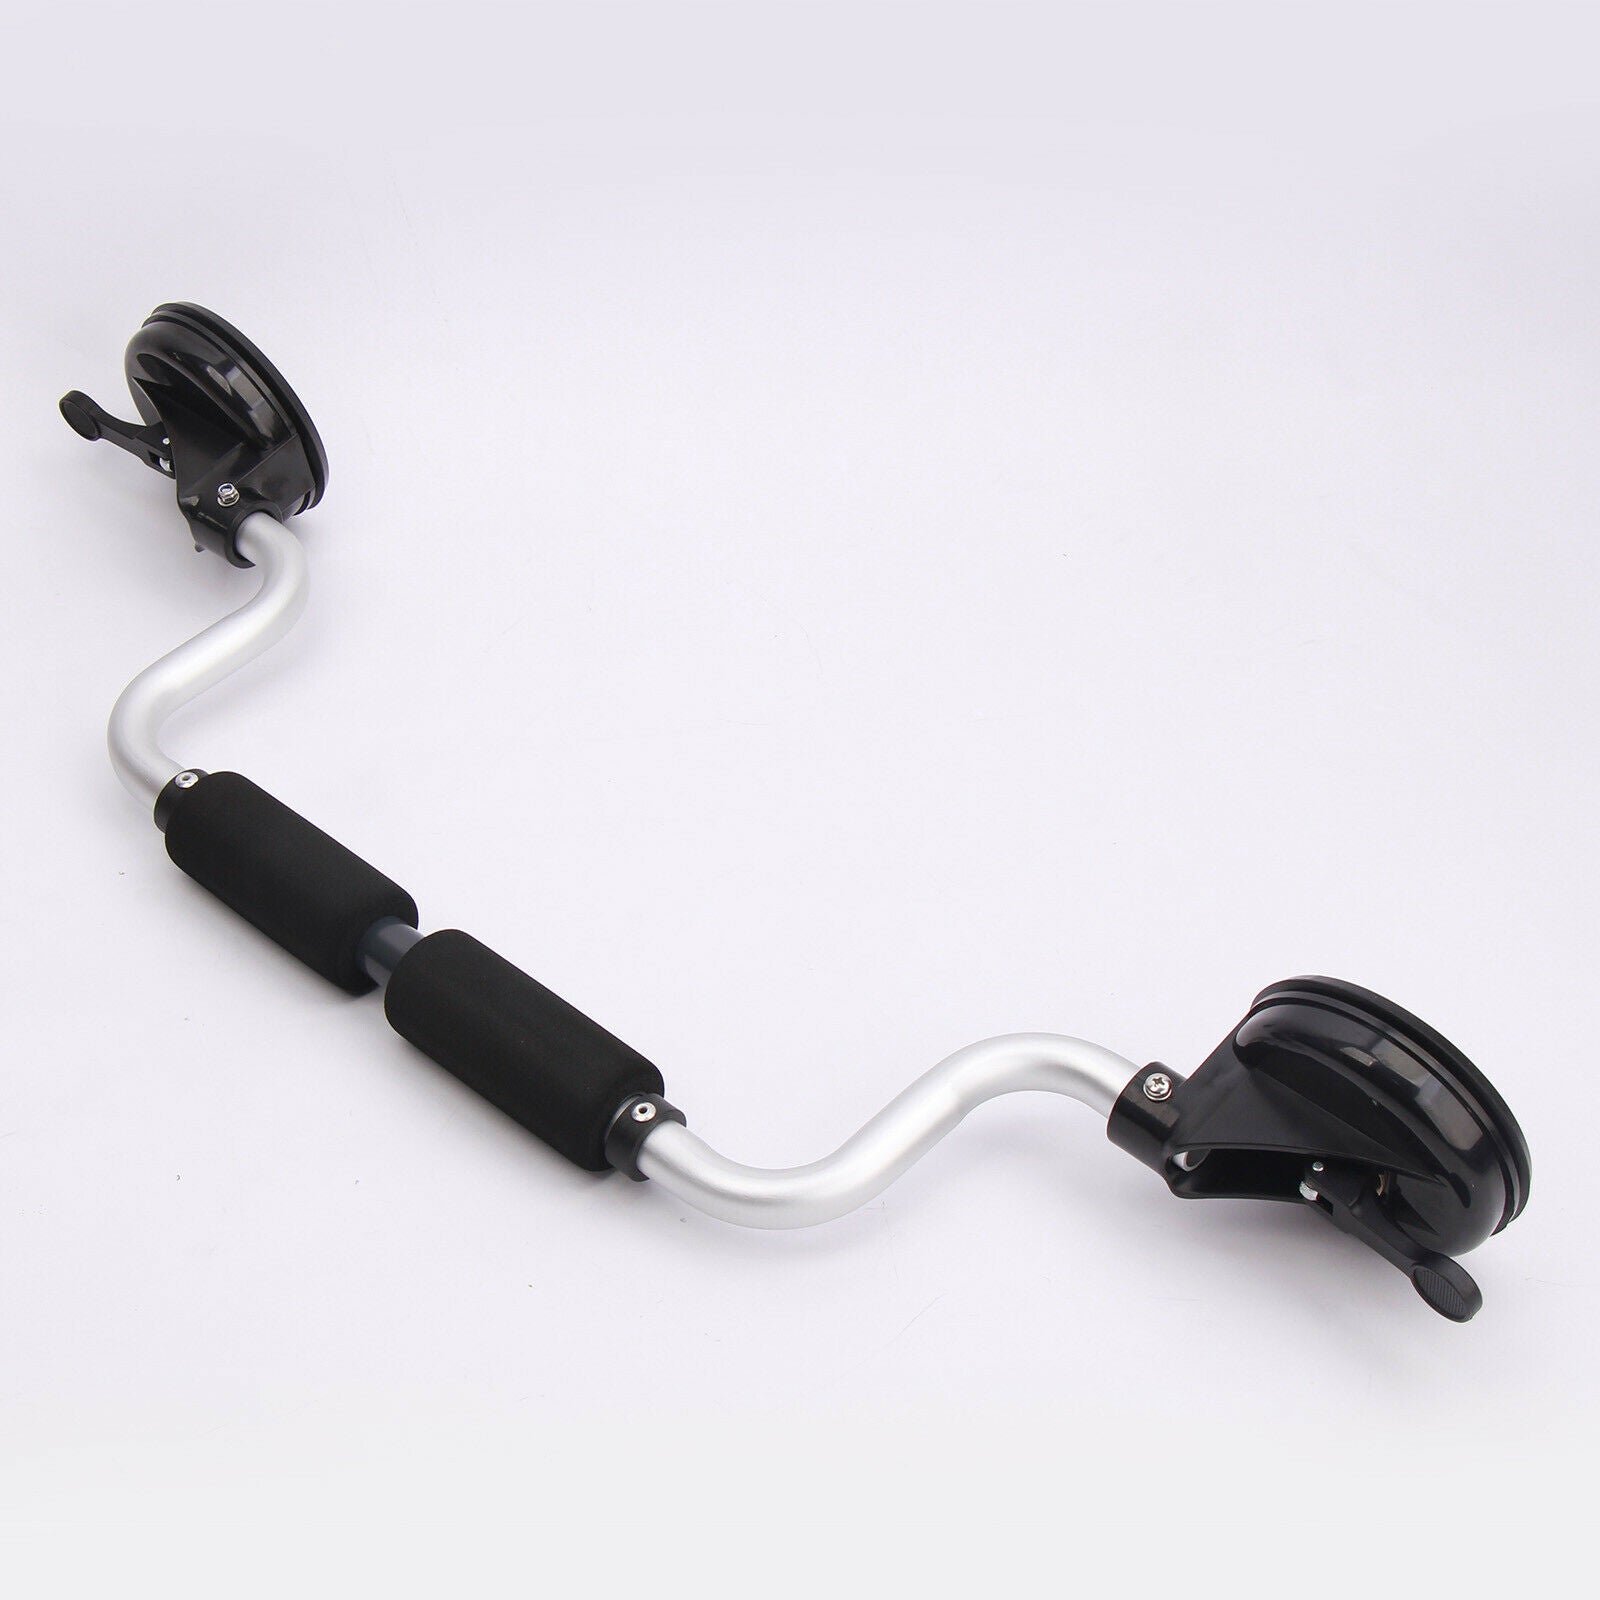 Universal Kayak Roller Car Top Rack Carrier Suction Cup Mounting Holder